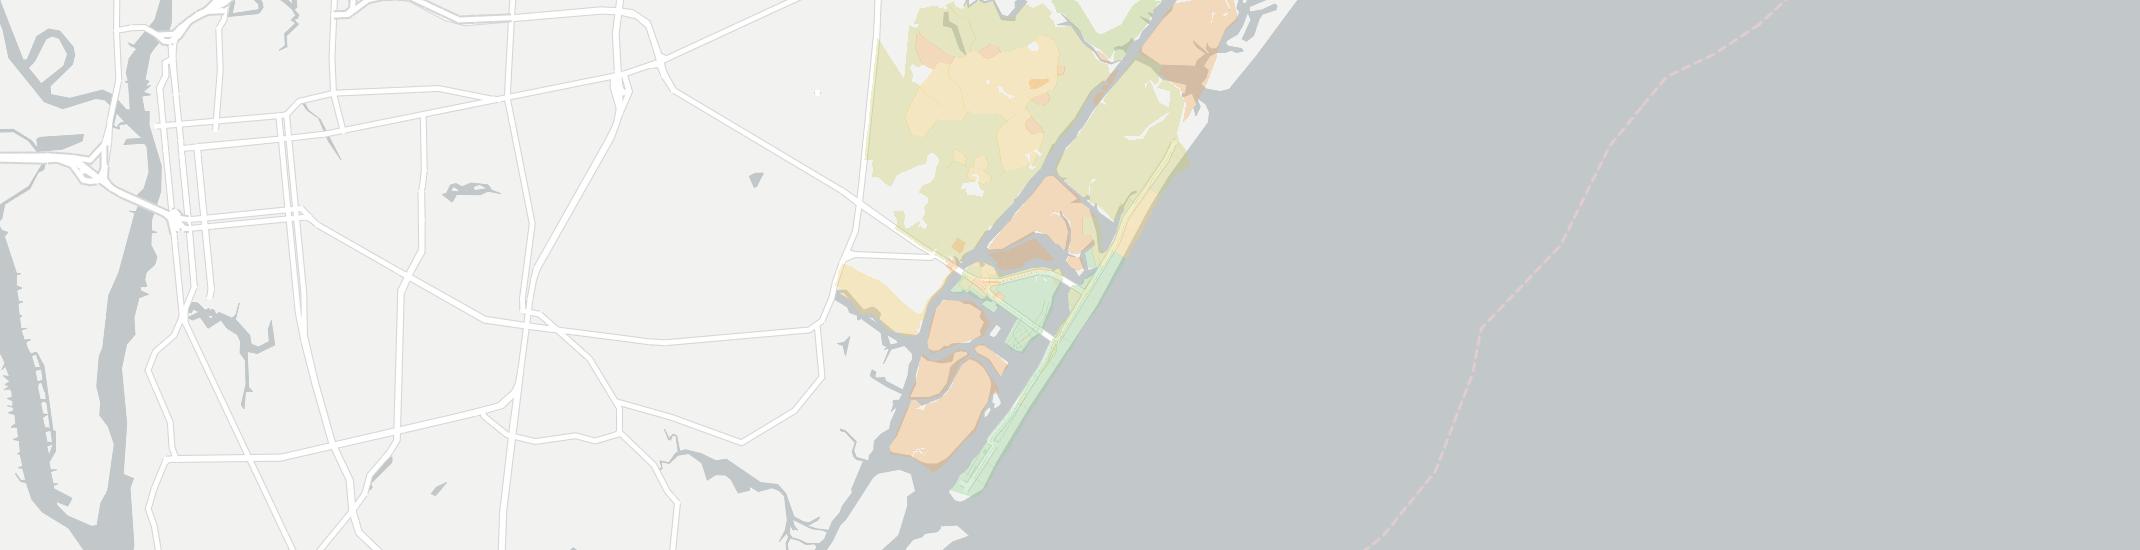 Wrightsville Beach Internet Competition Map. Click for interactive map.